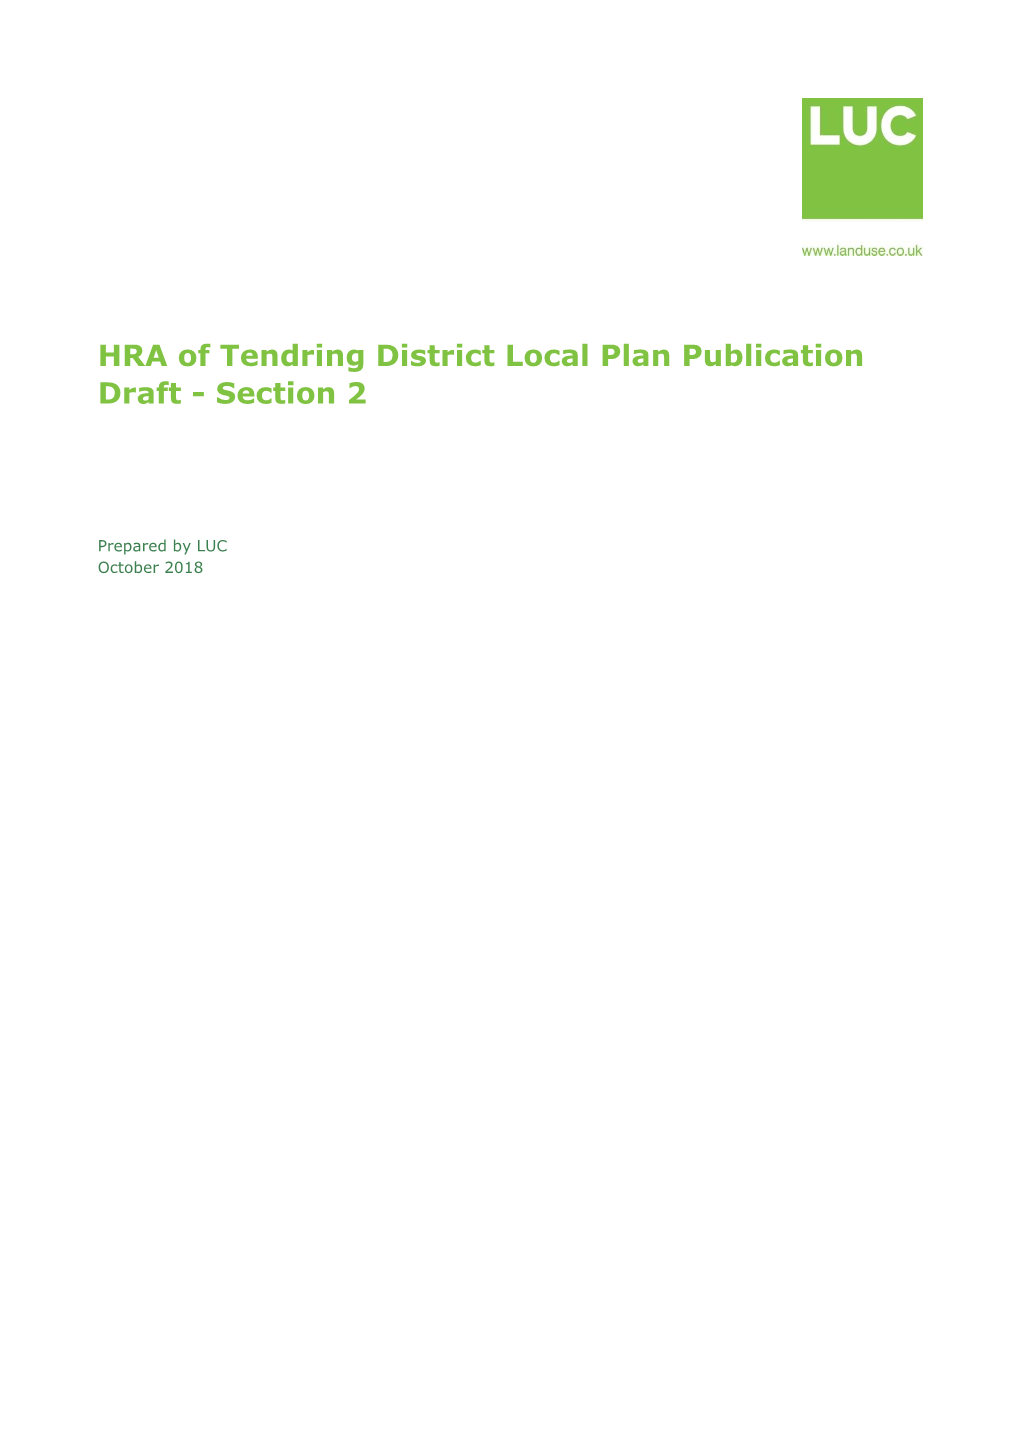 HRA of Tendring District Local Plan Publication Draft - Section 2